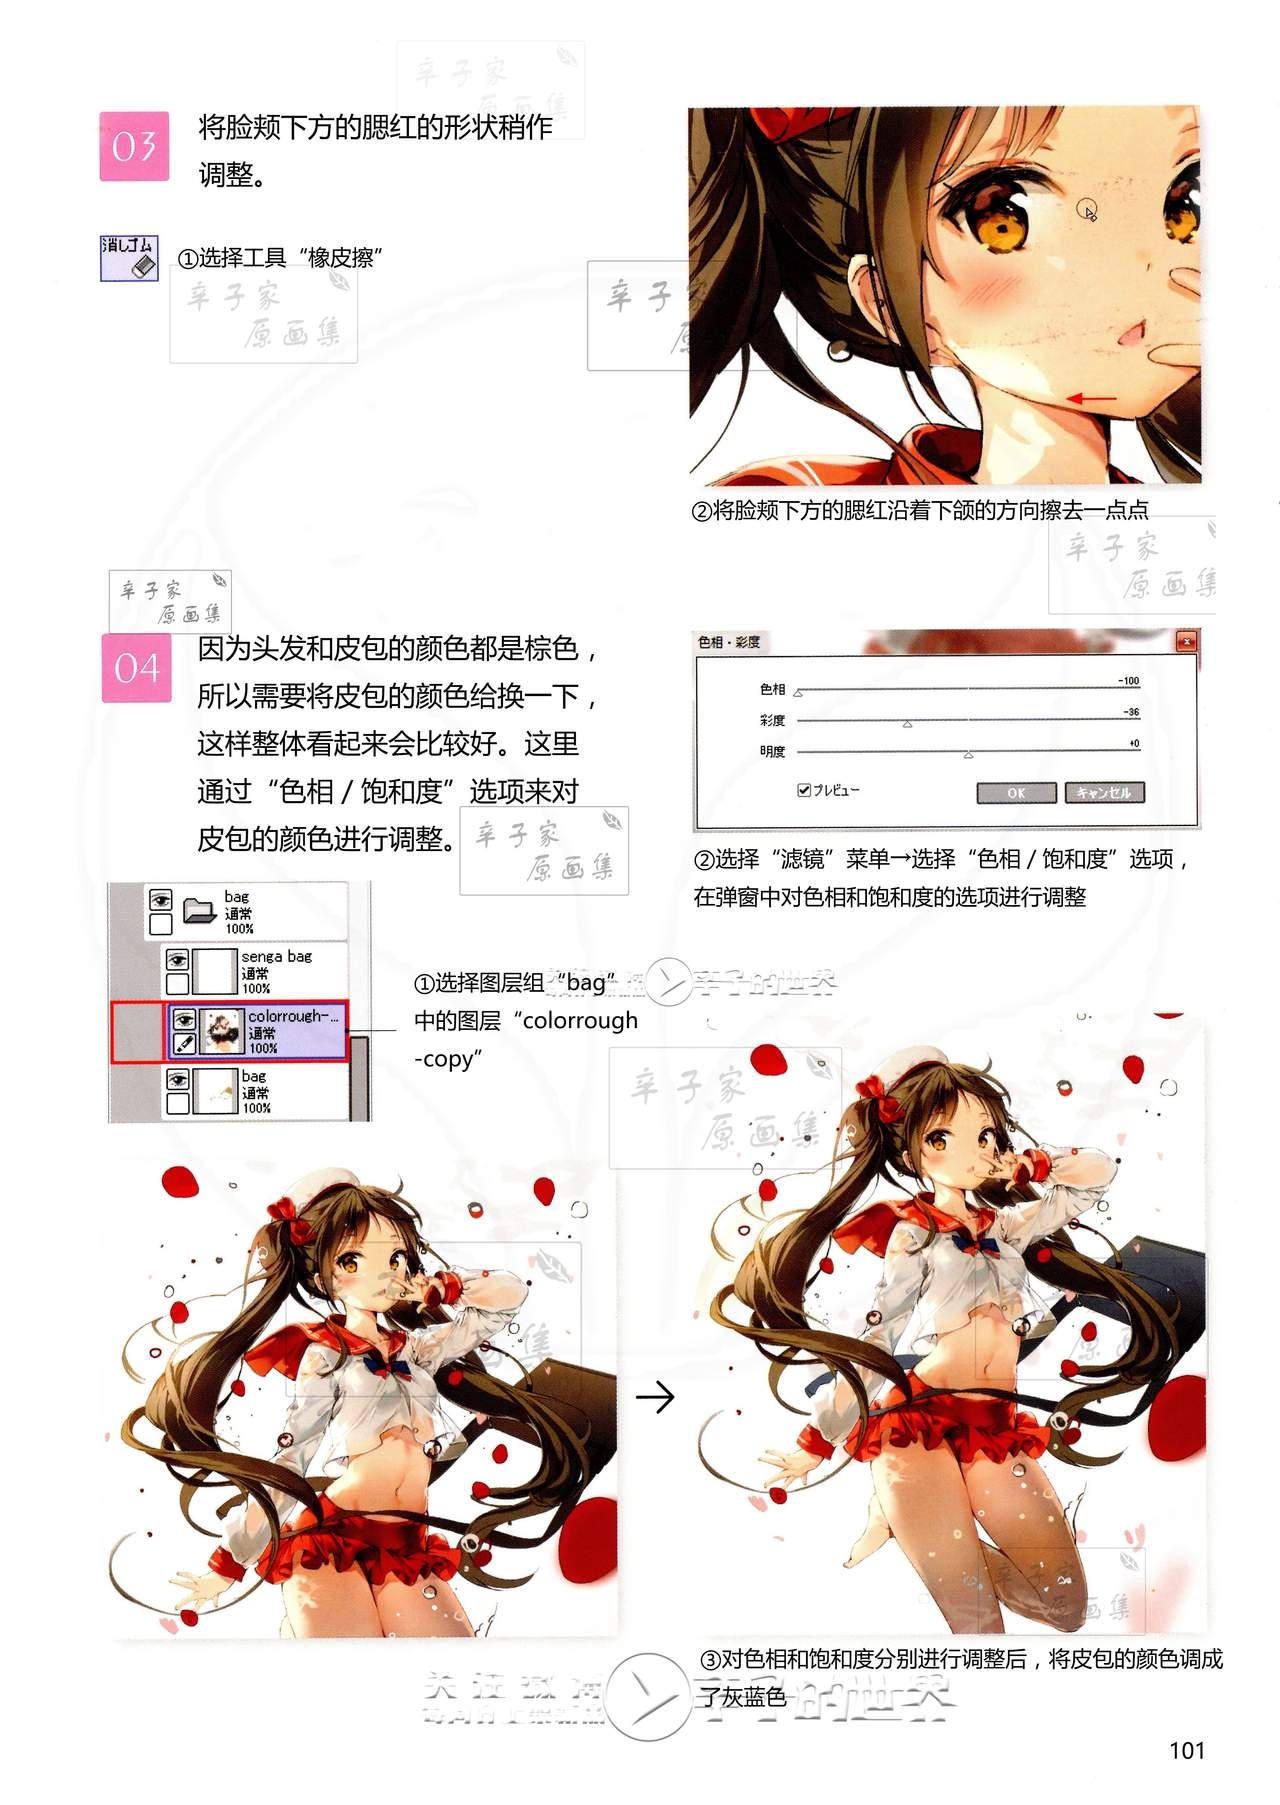 [Anmi] Lets Make ★ Character CG illustration techniques vol.9 [Chinese] 99